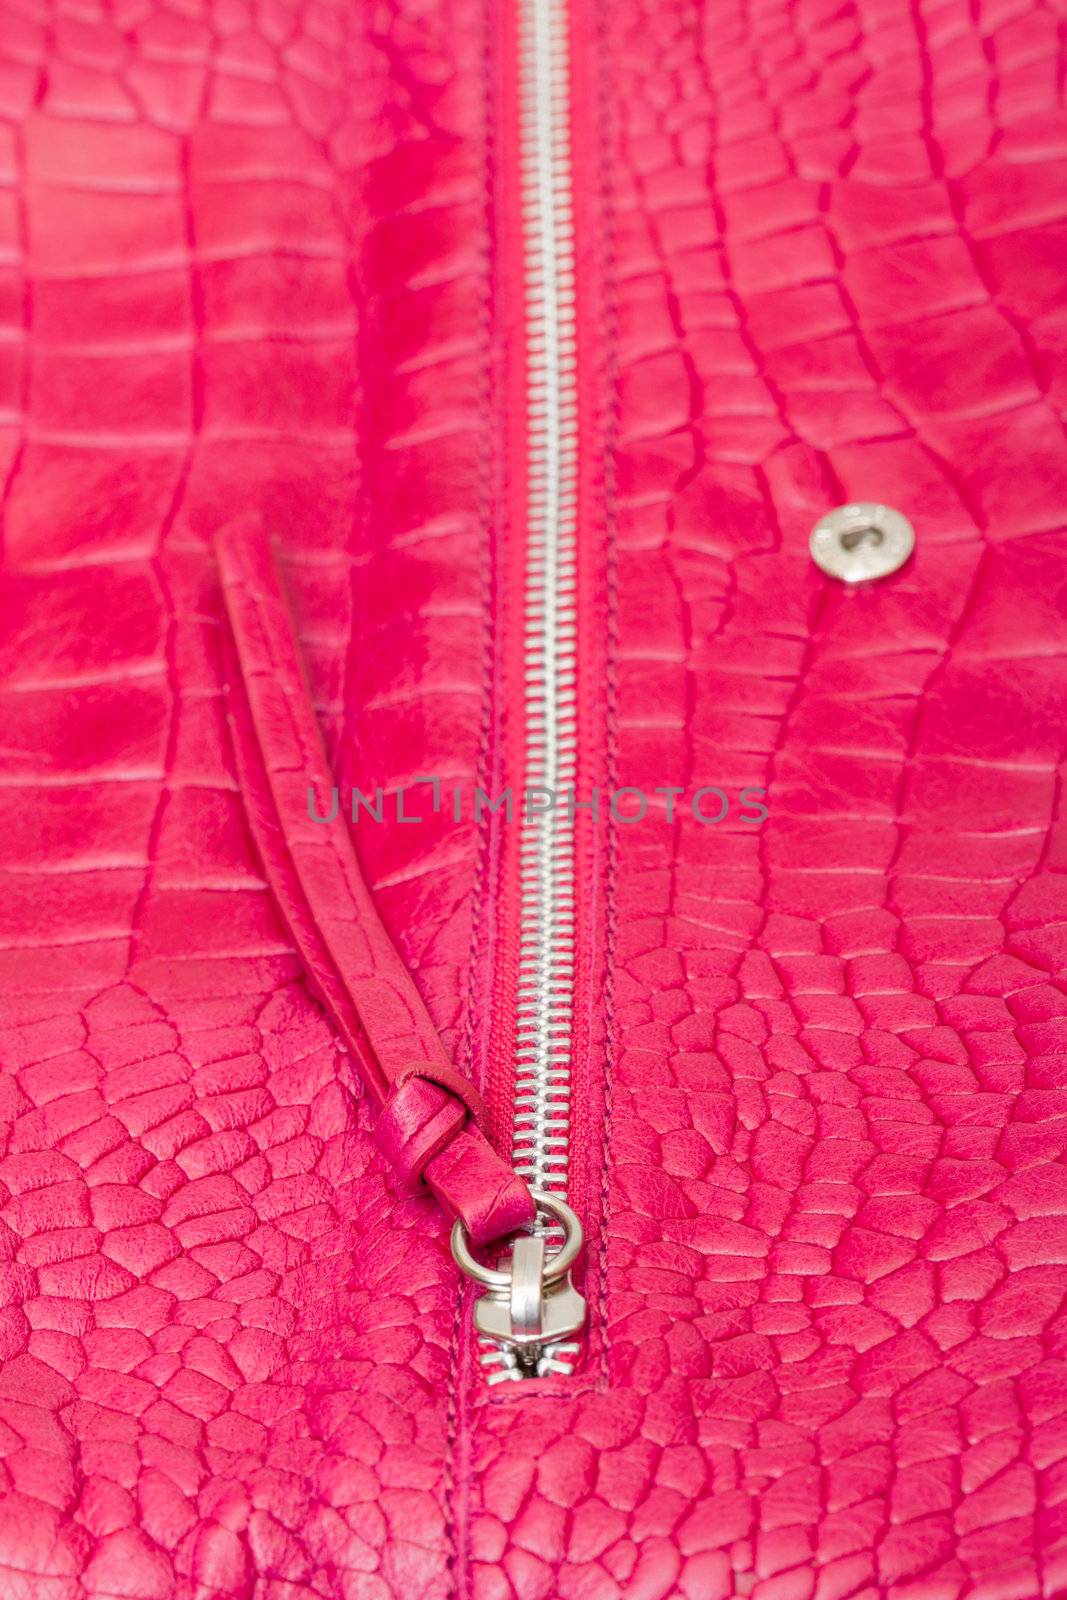 Textured pink leather with zipper by Discovod